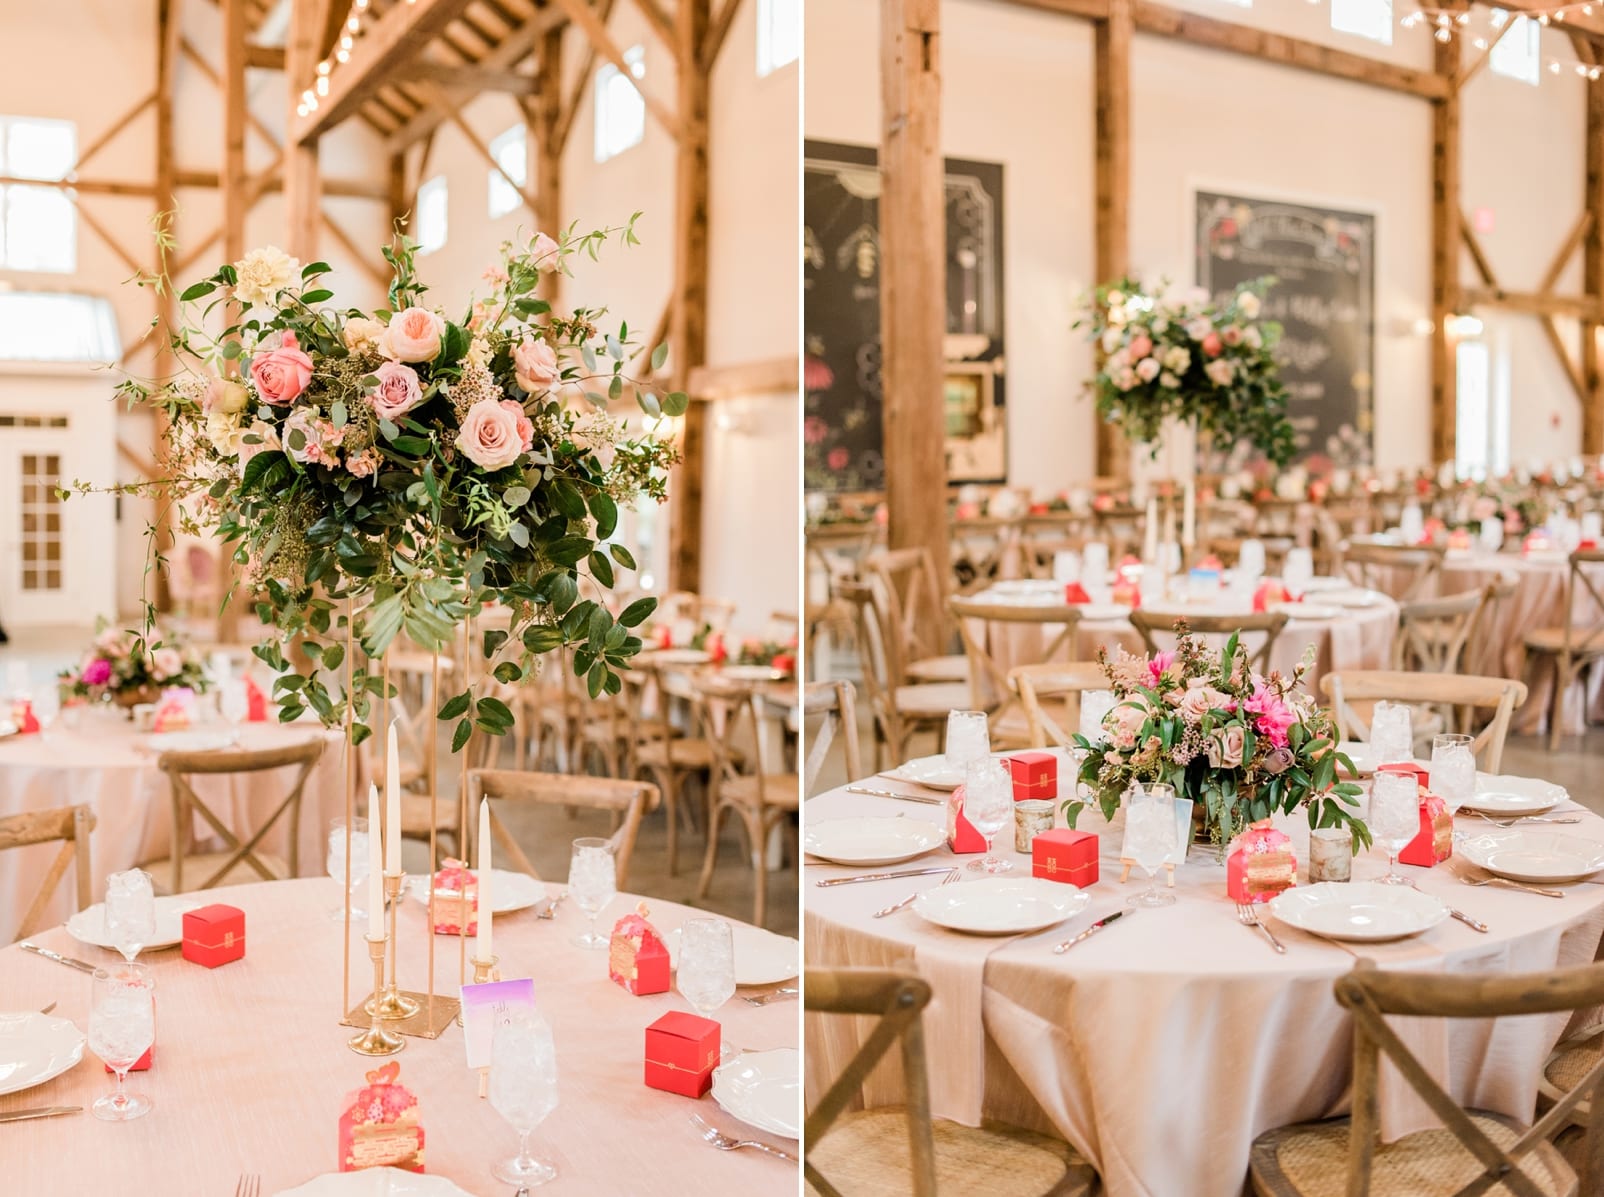 Barn of Chapel Hill reception with round tables and tall floral centerpieces photo